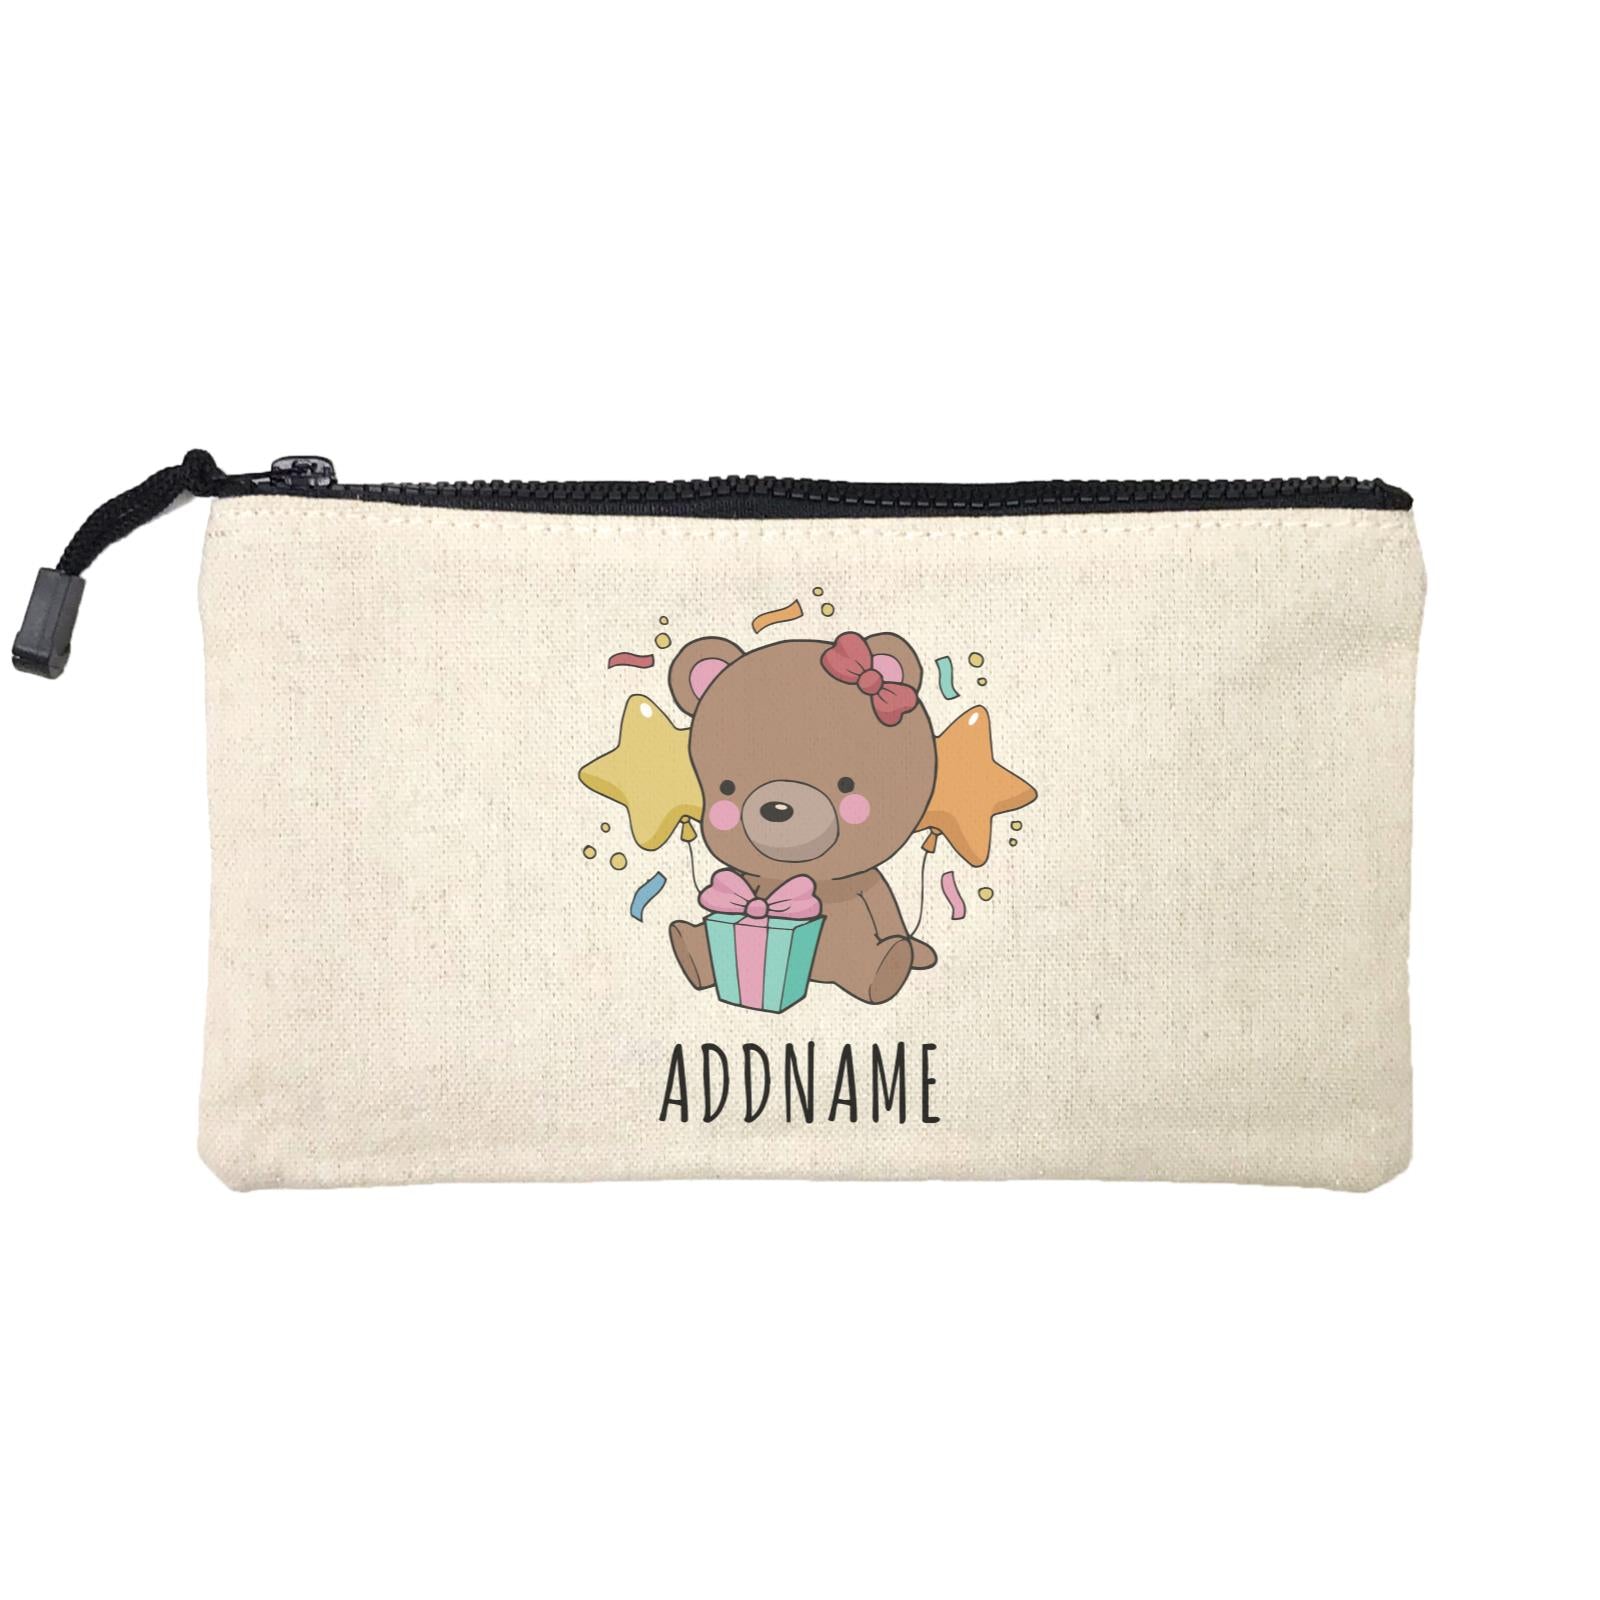 Birthday Sketch Animals Bear with Present Addname Mini Accessories Stationery Pouch